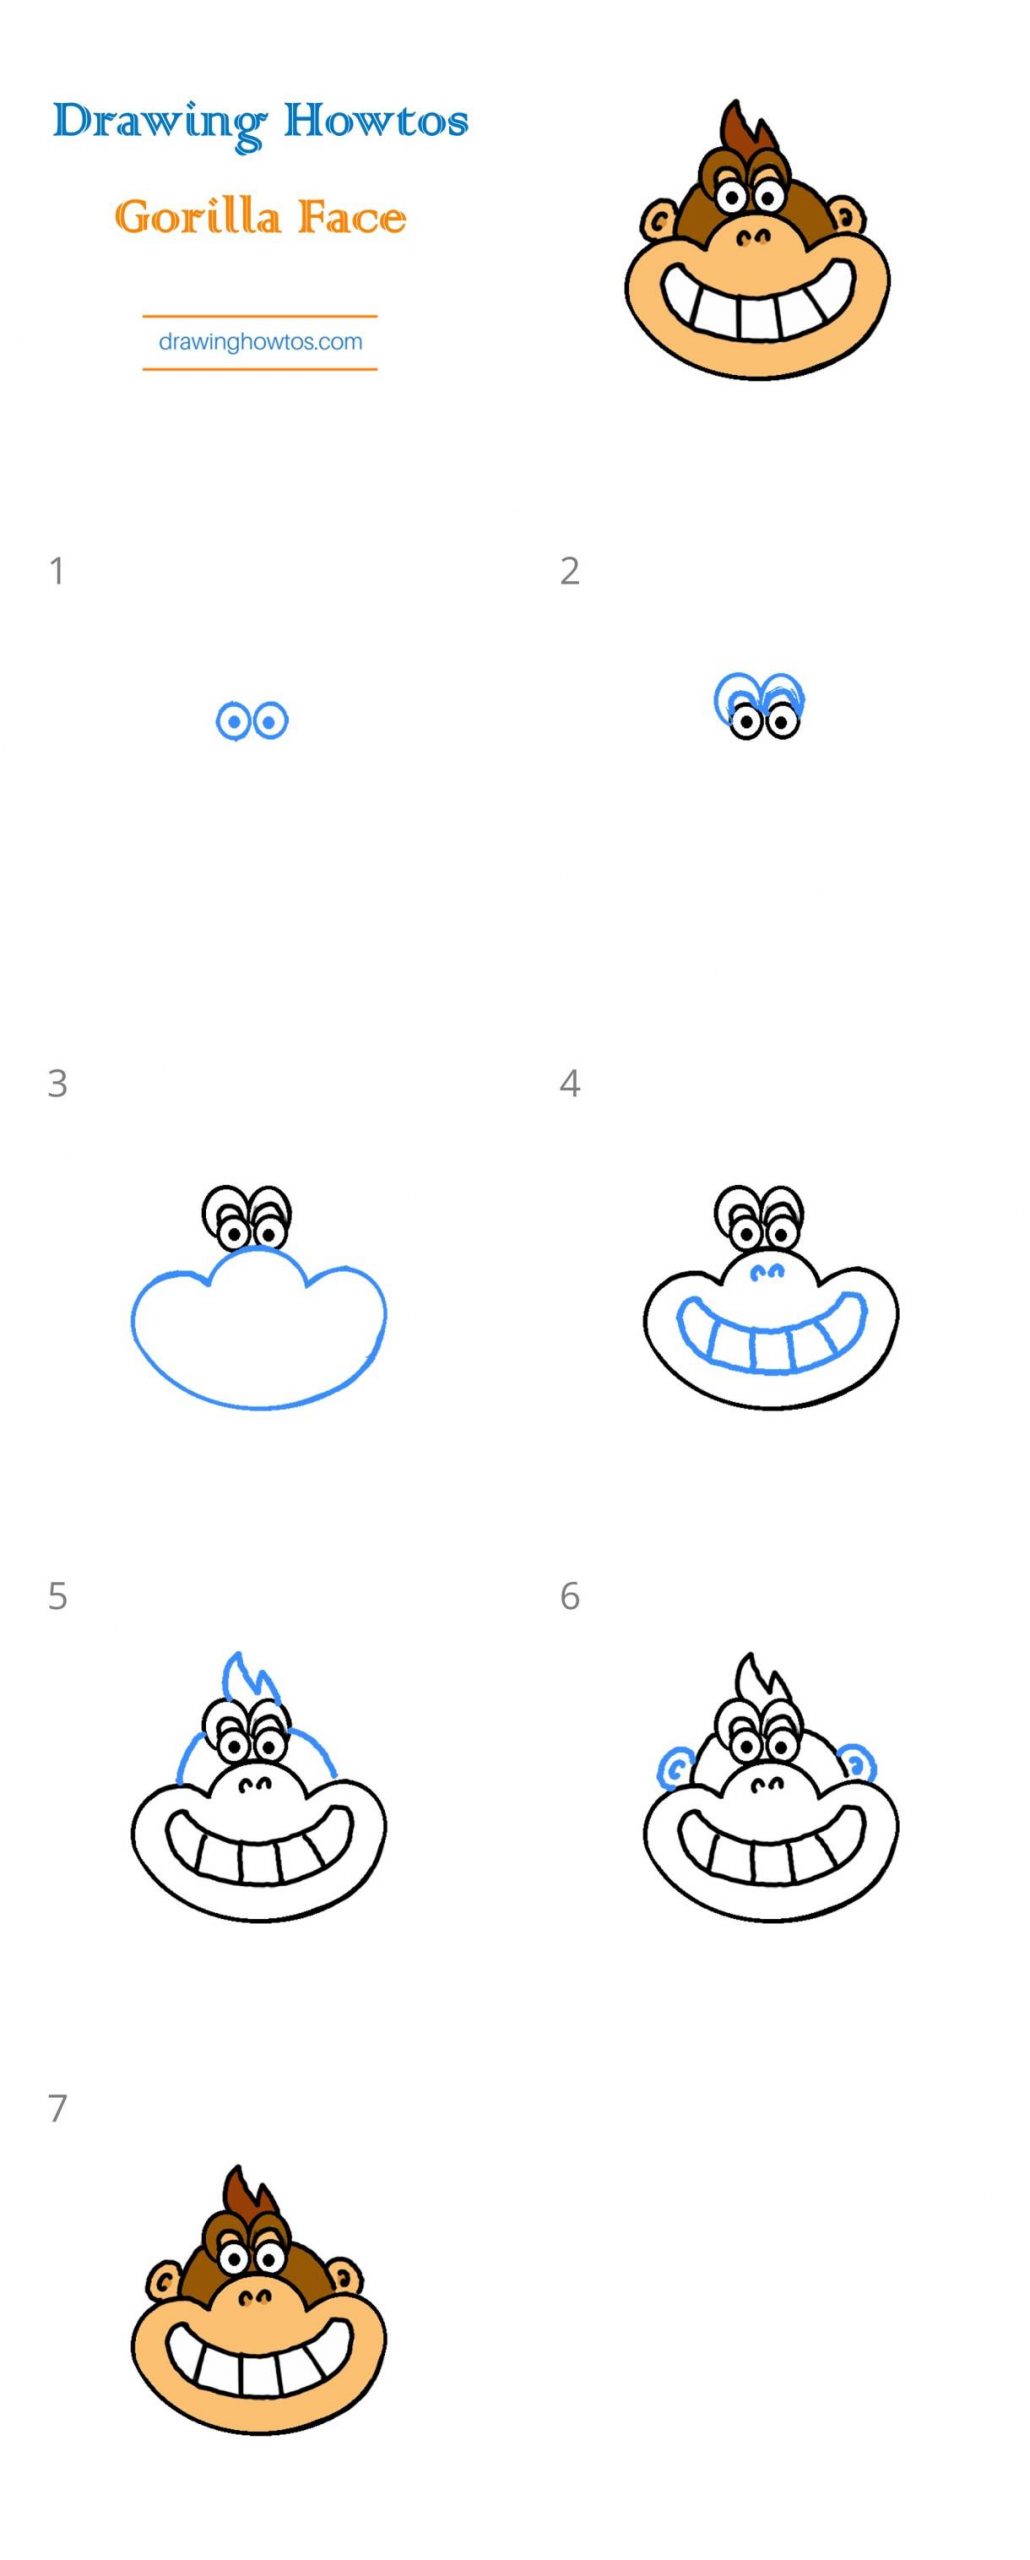 How to Draw a Gorilla Face Step by Step